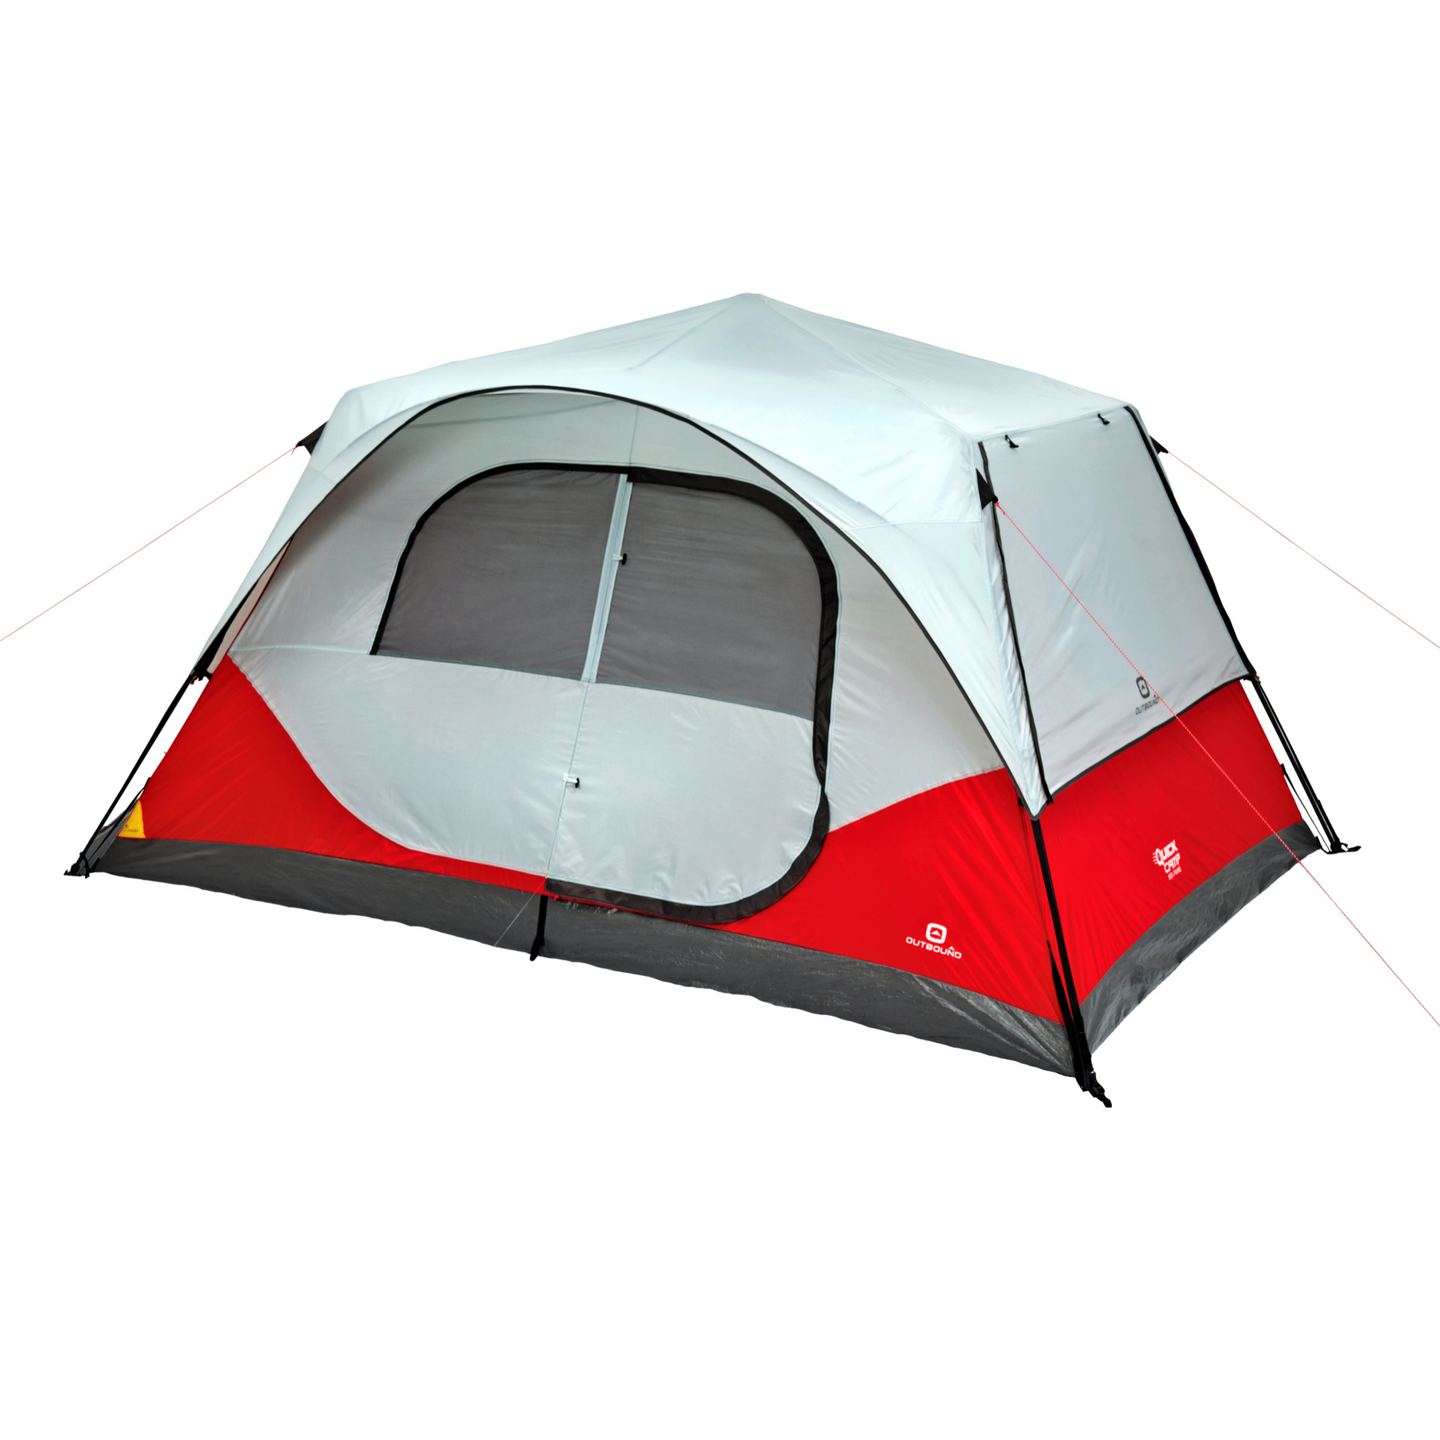 Fully built 8-person cabin tent with rainfly in red